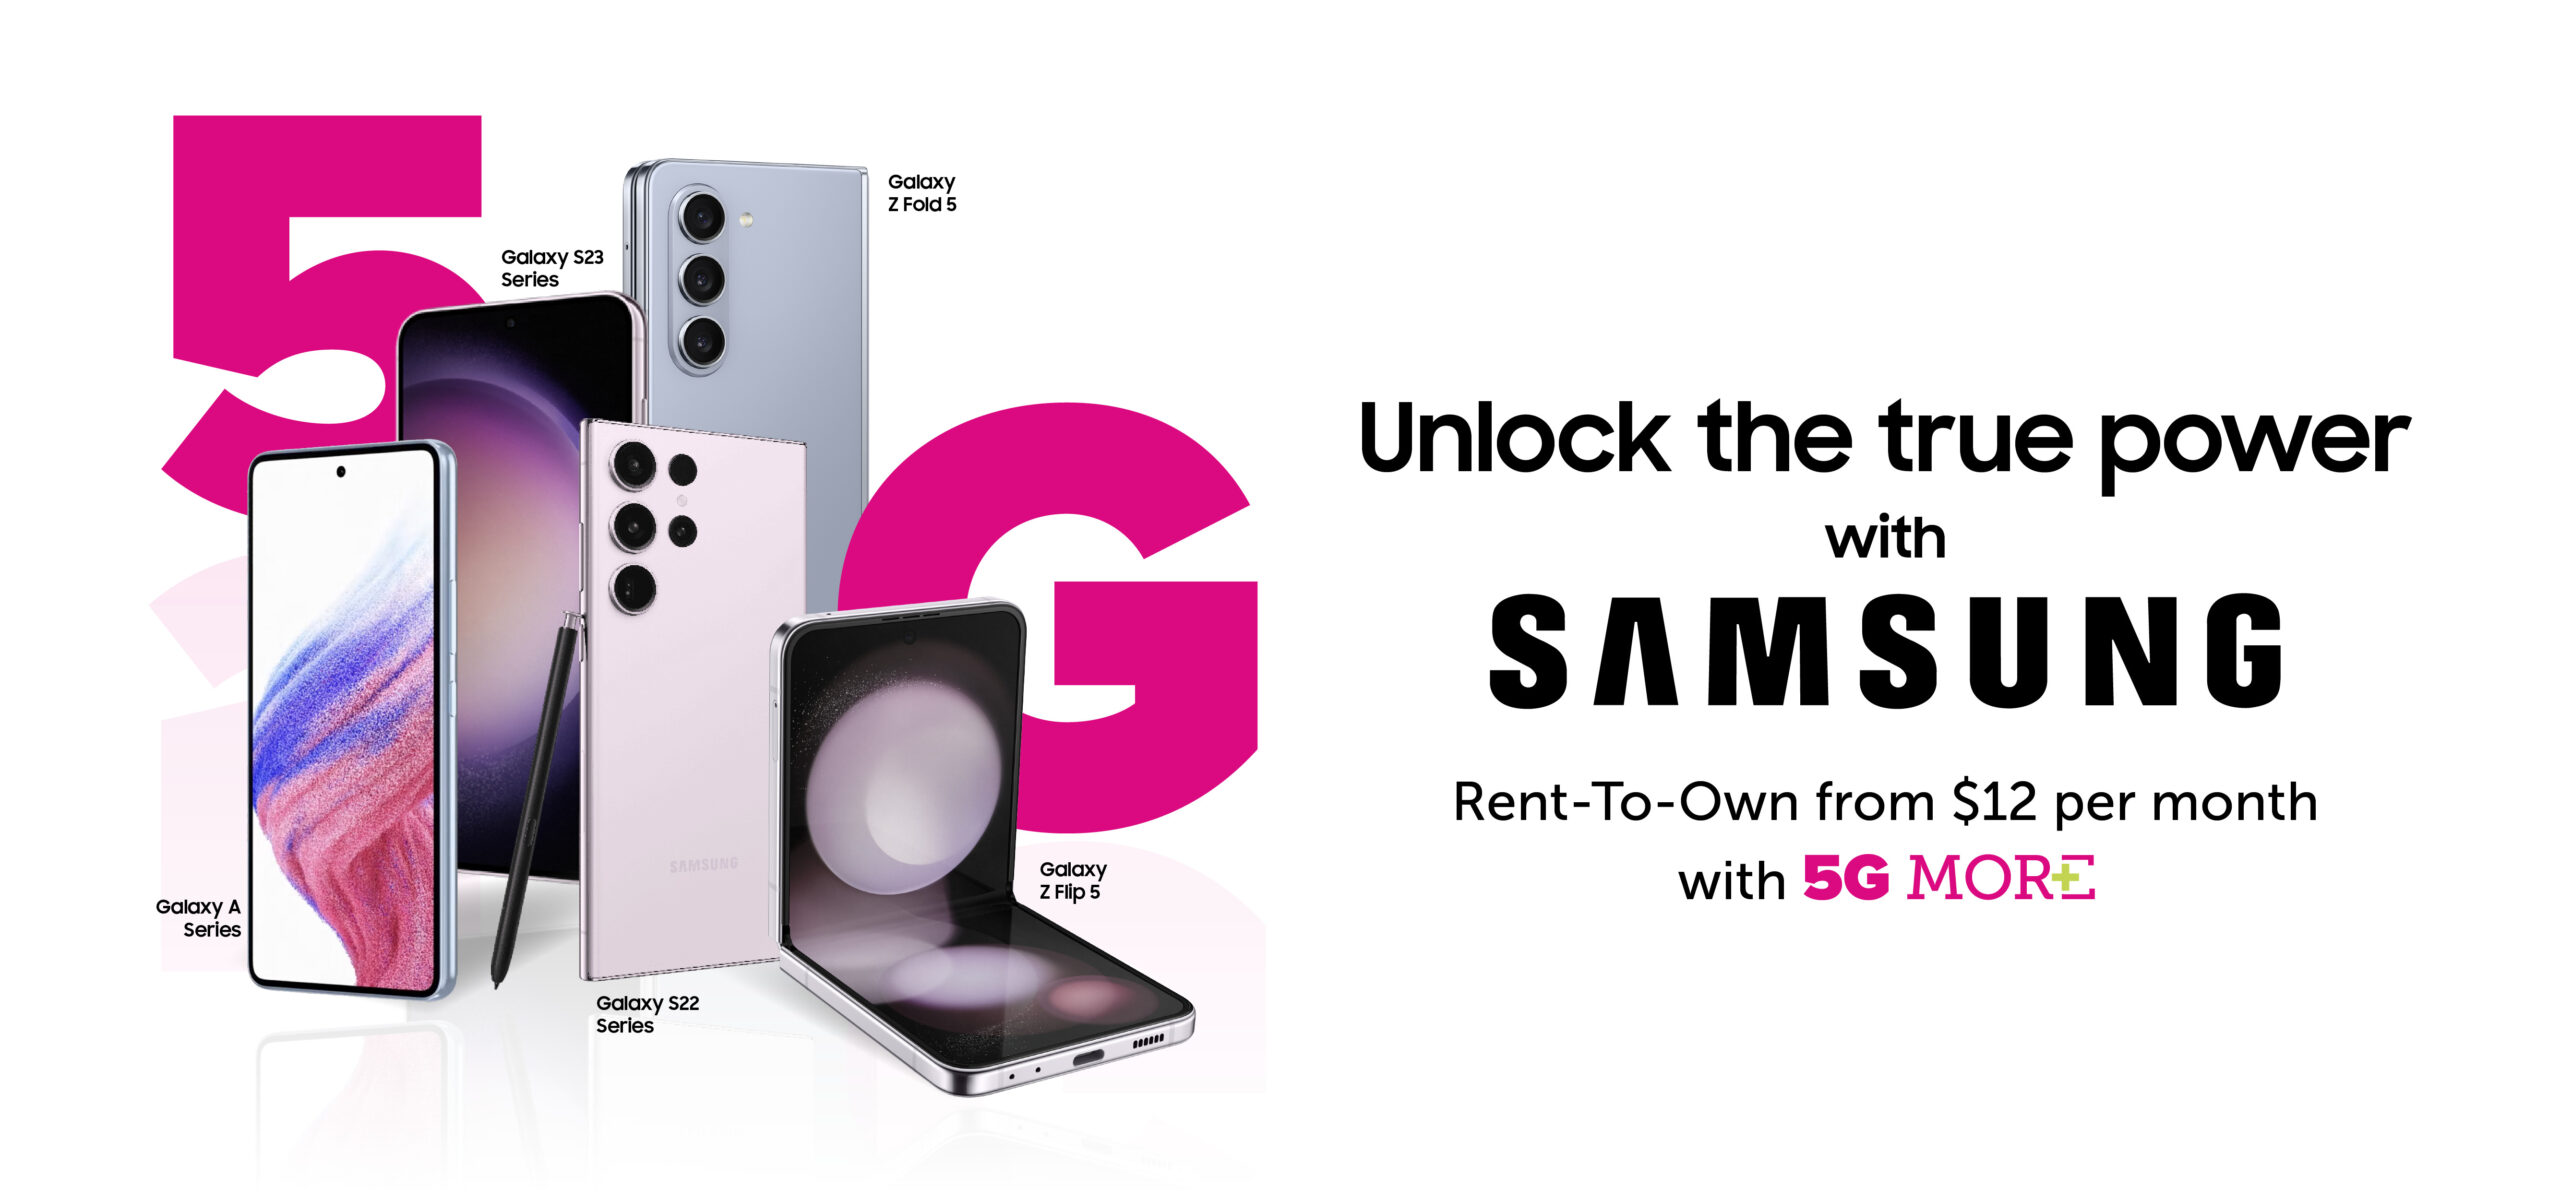 Samsung devices for as low as $12/month